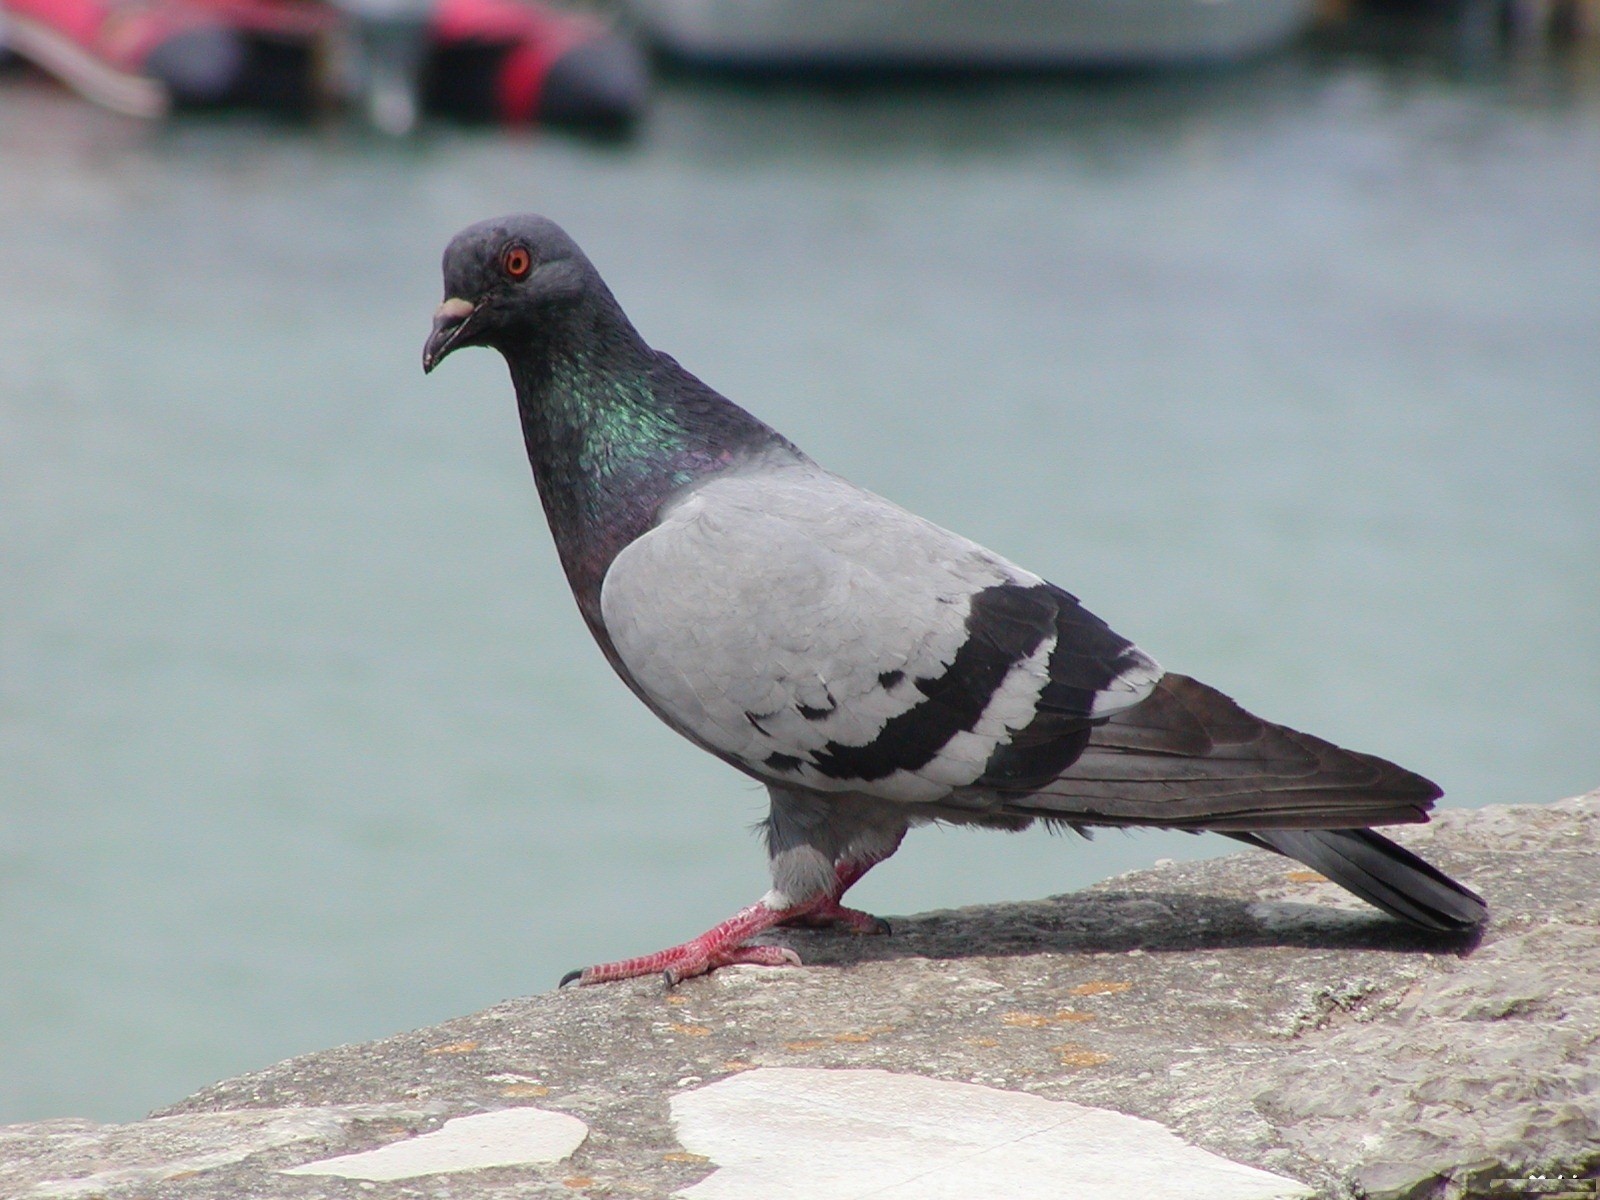 Homing Pigeon Sitting On Wall Hd Images Of Pigeon 1600x1200 Wallpaper Teahub Io